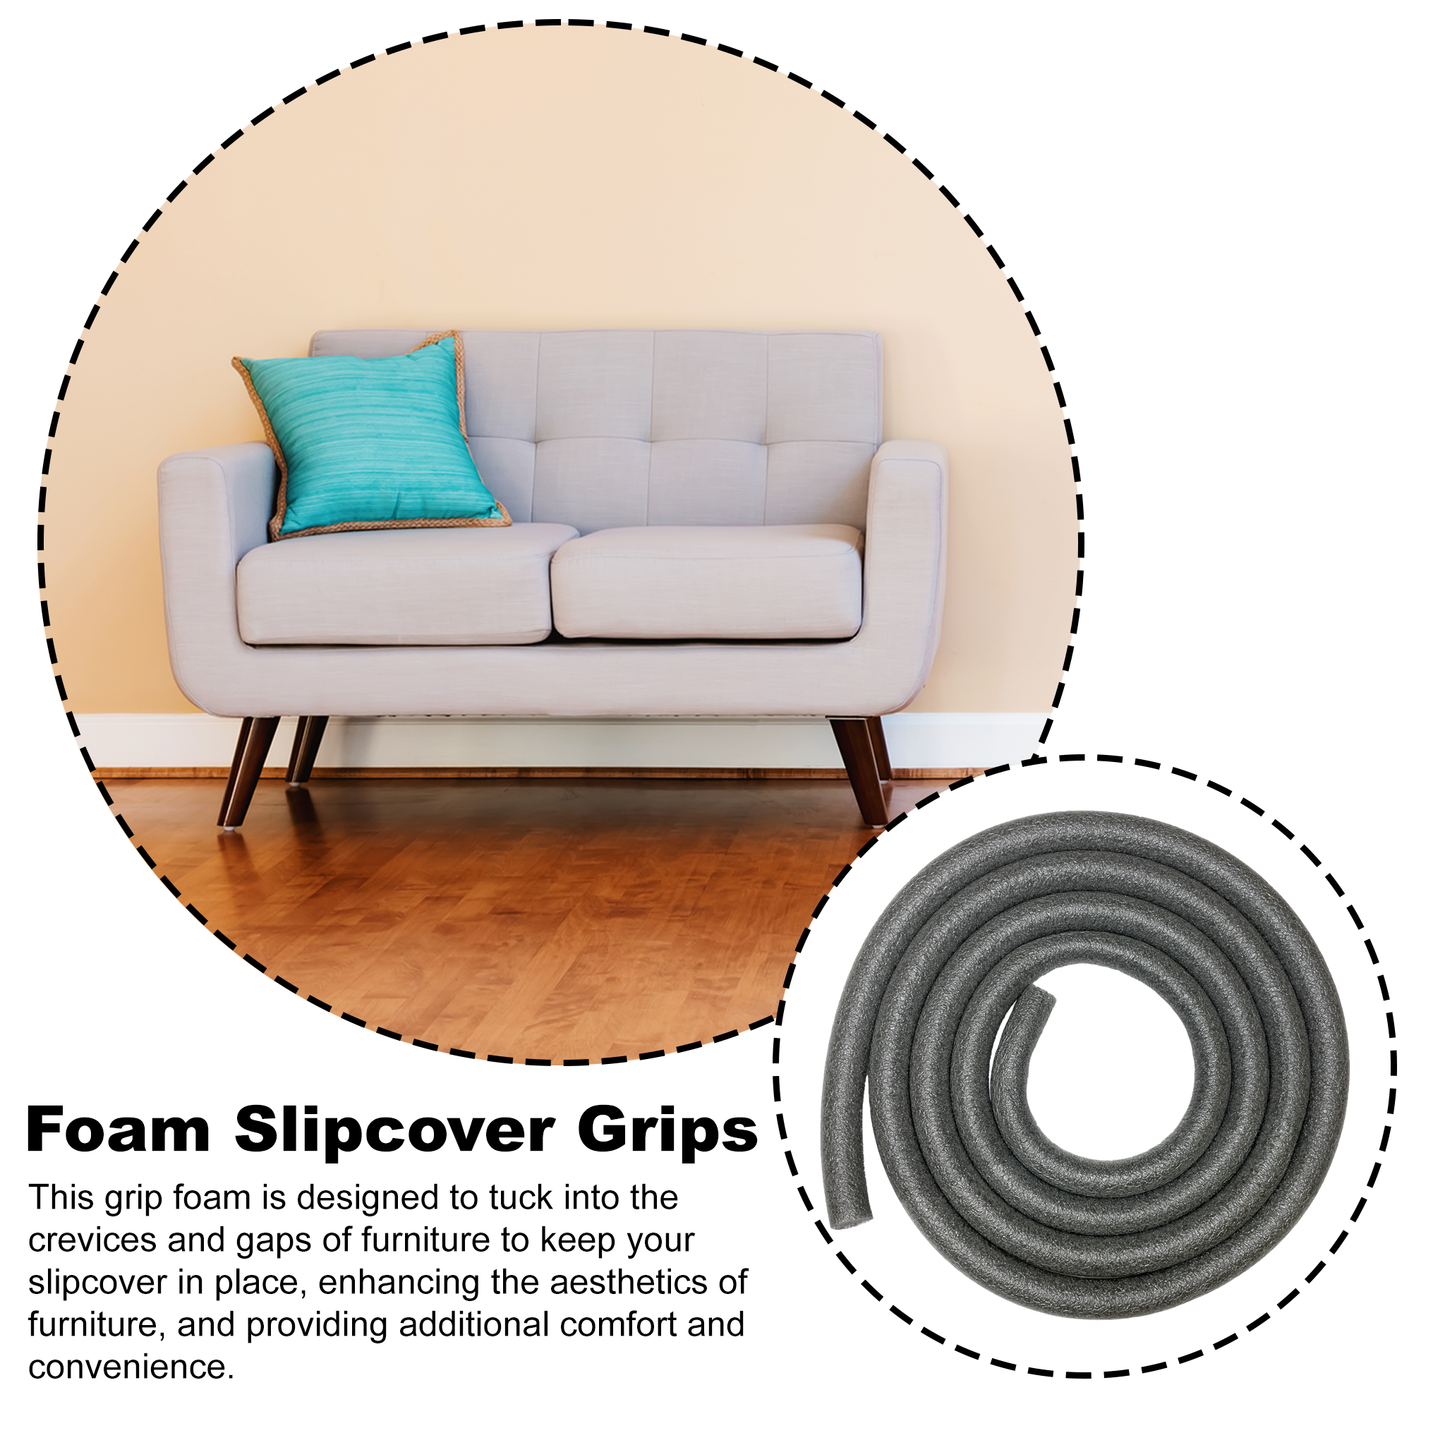 12ft Sofa Slipcover Tuck Grip Rope Non Slip Foam Couch Cushion Cover Grip for Furniture